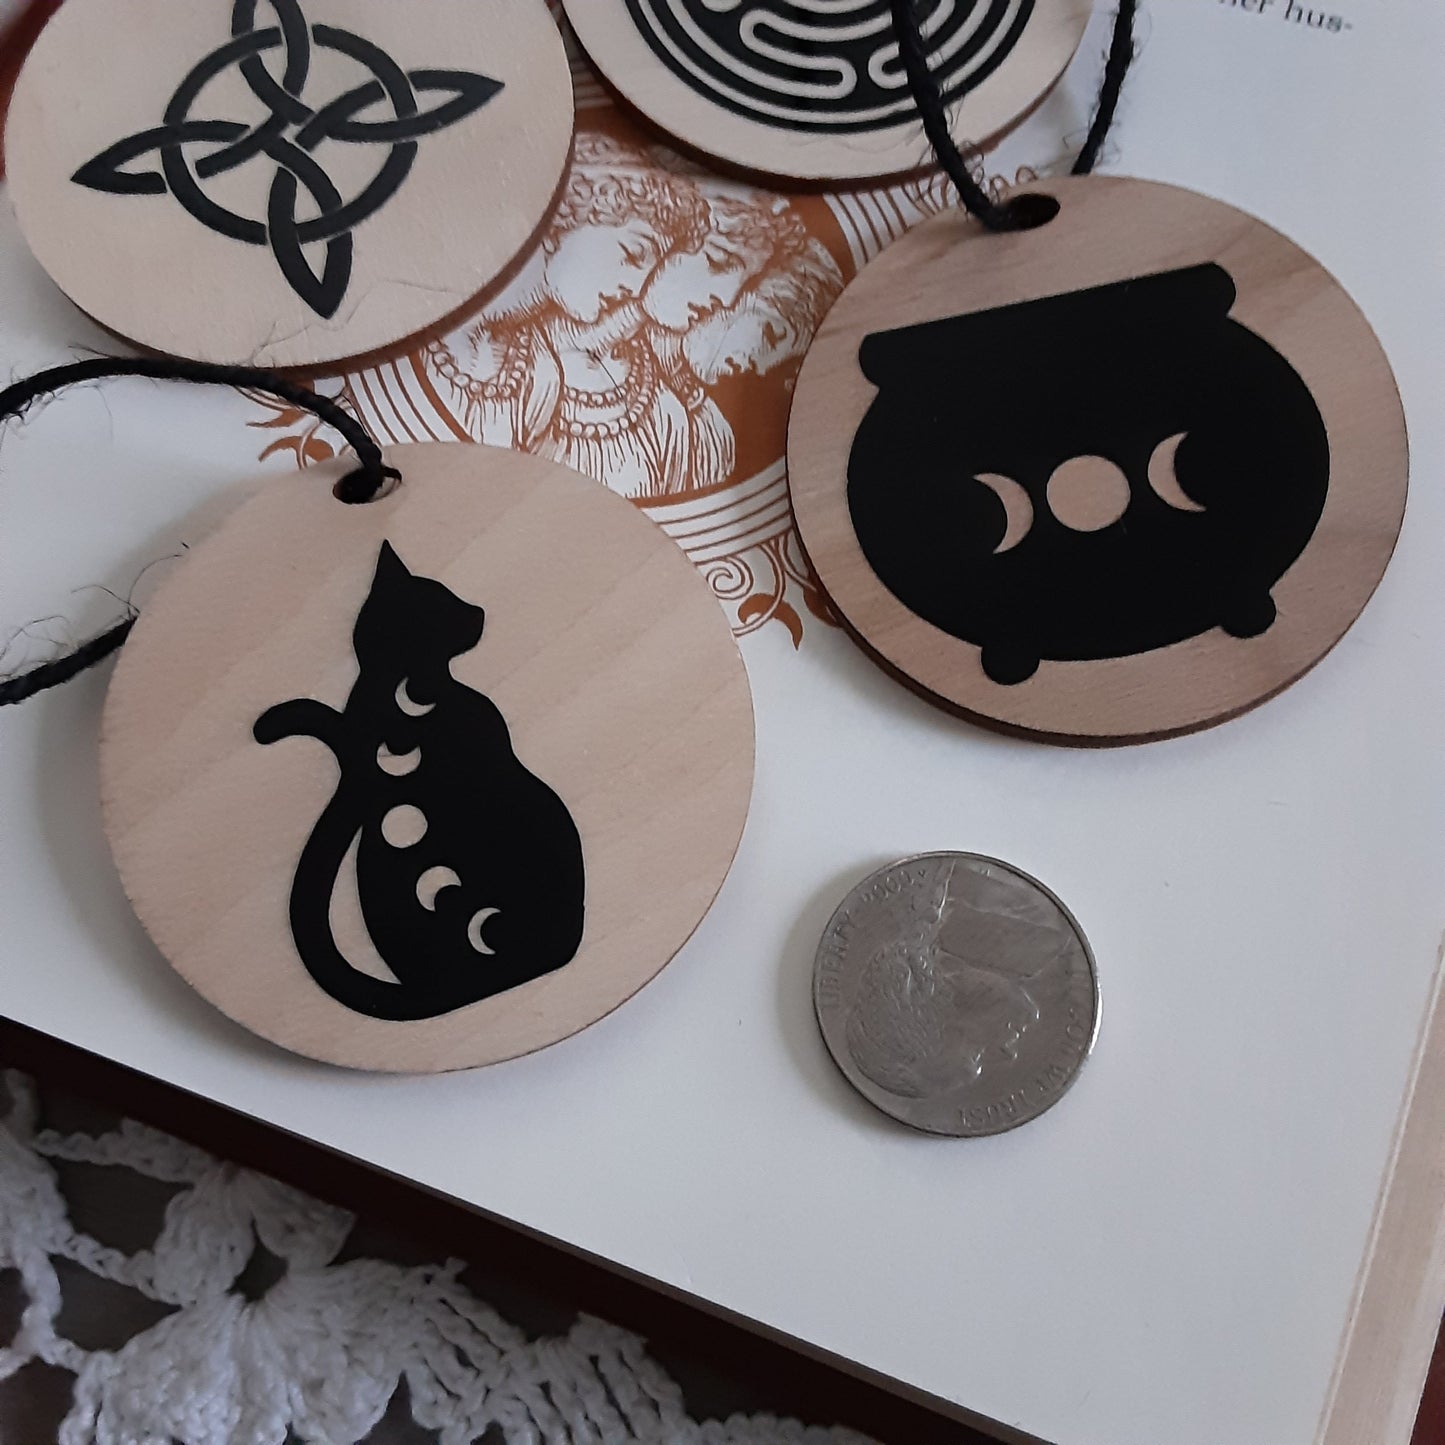 Yule ornament 1 pc wooden decor Cauldron Triple Moon Witch knot Moon Phase Hecate&#39;s Wheel Pagan Holiday decor Witchy Gothic vibes